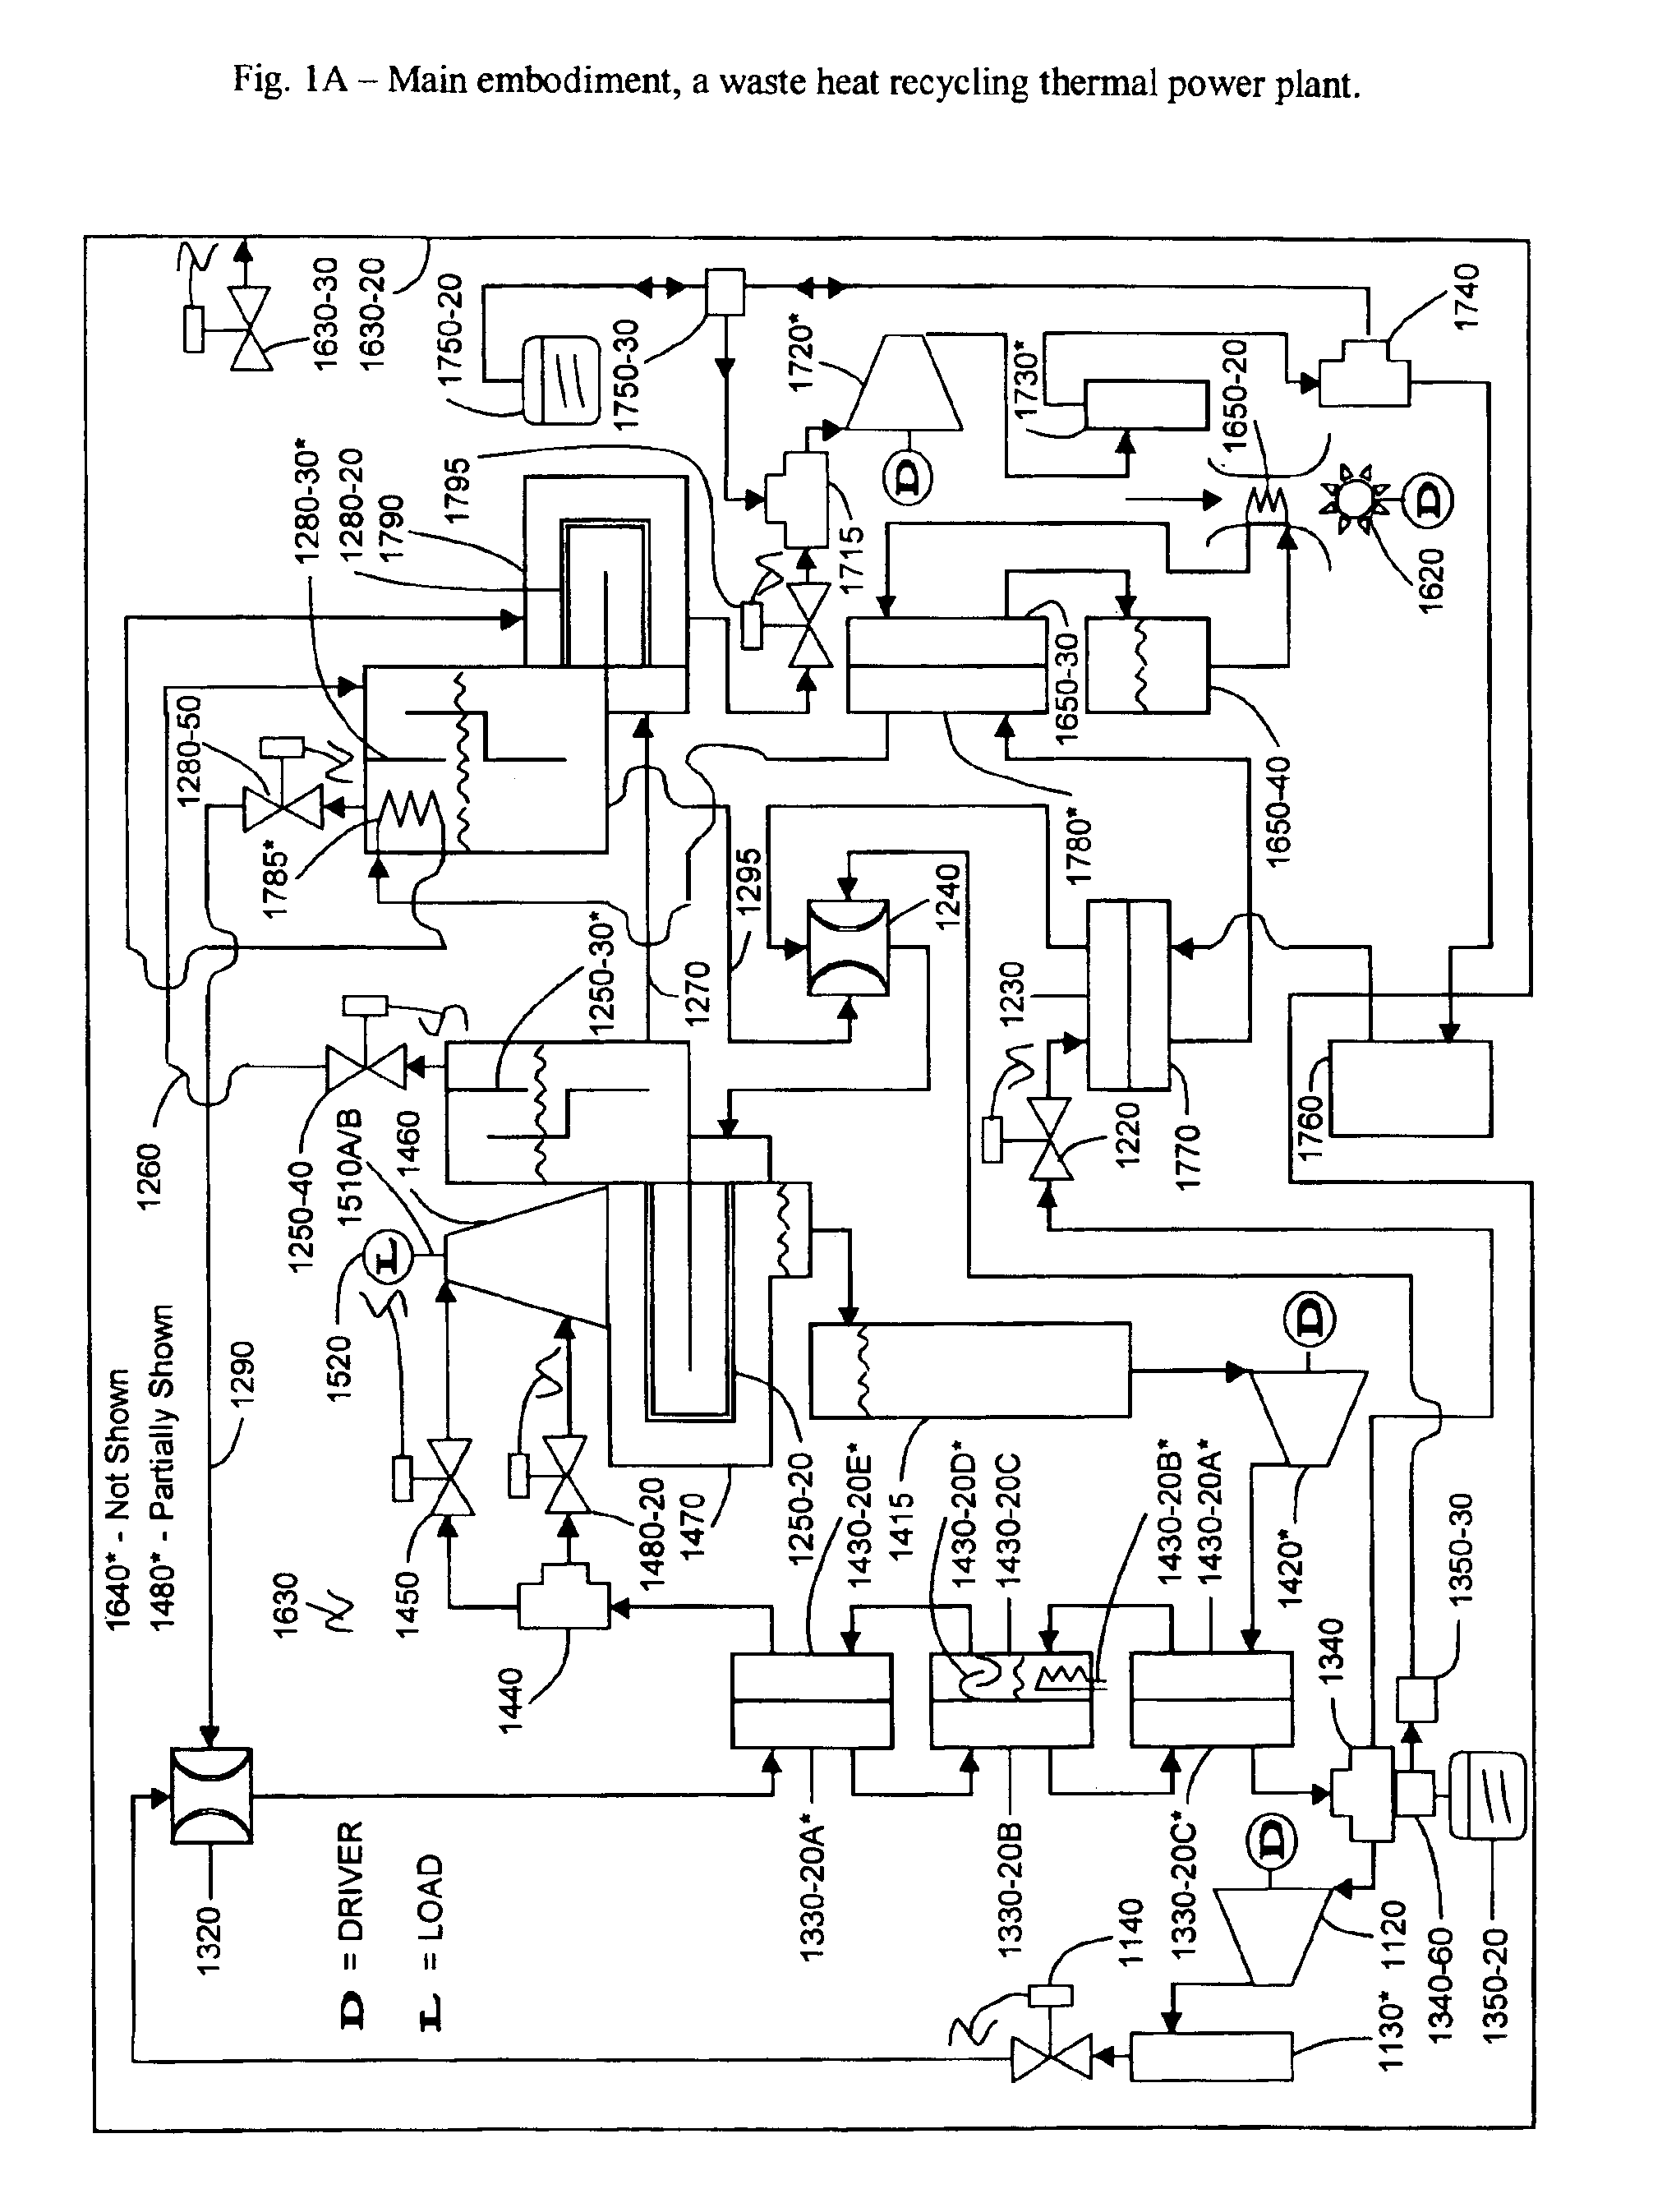 Method and apparatus for a waste heat recycling thermal power plant